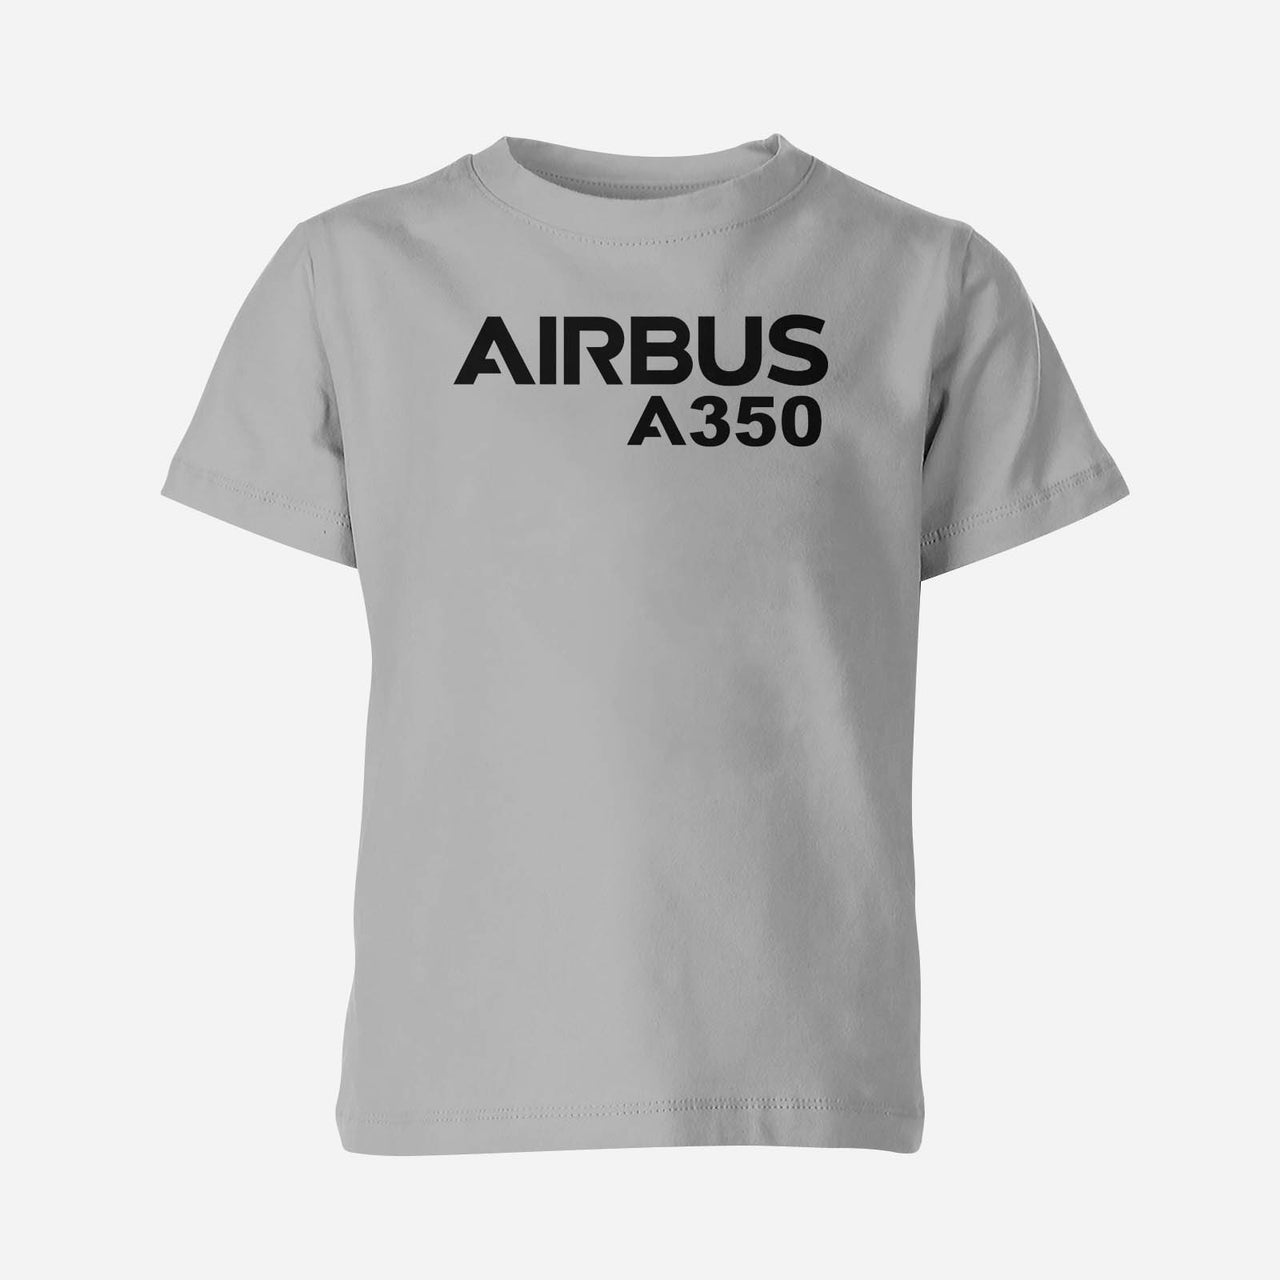 Airbus A350 & Text Designed Children T-Shirts